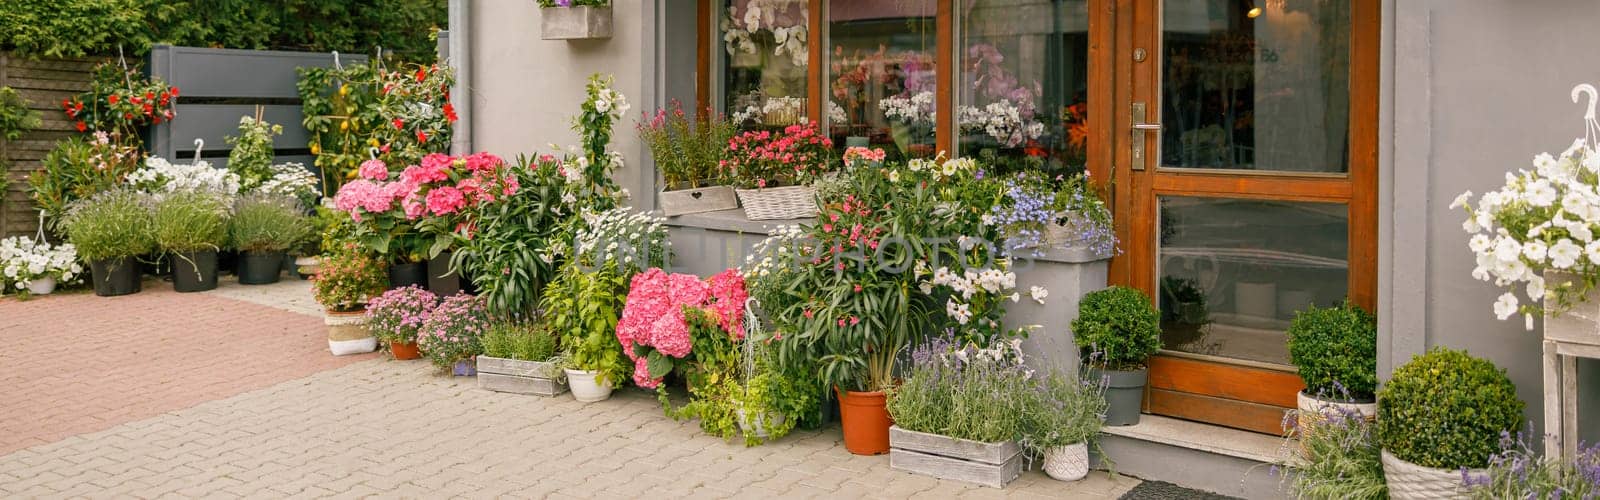 Facade of beautiful flower shop with different housplants and flowers on sunny day by Yaroslav_astakhov